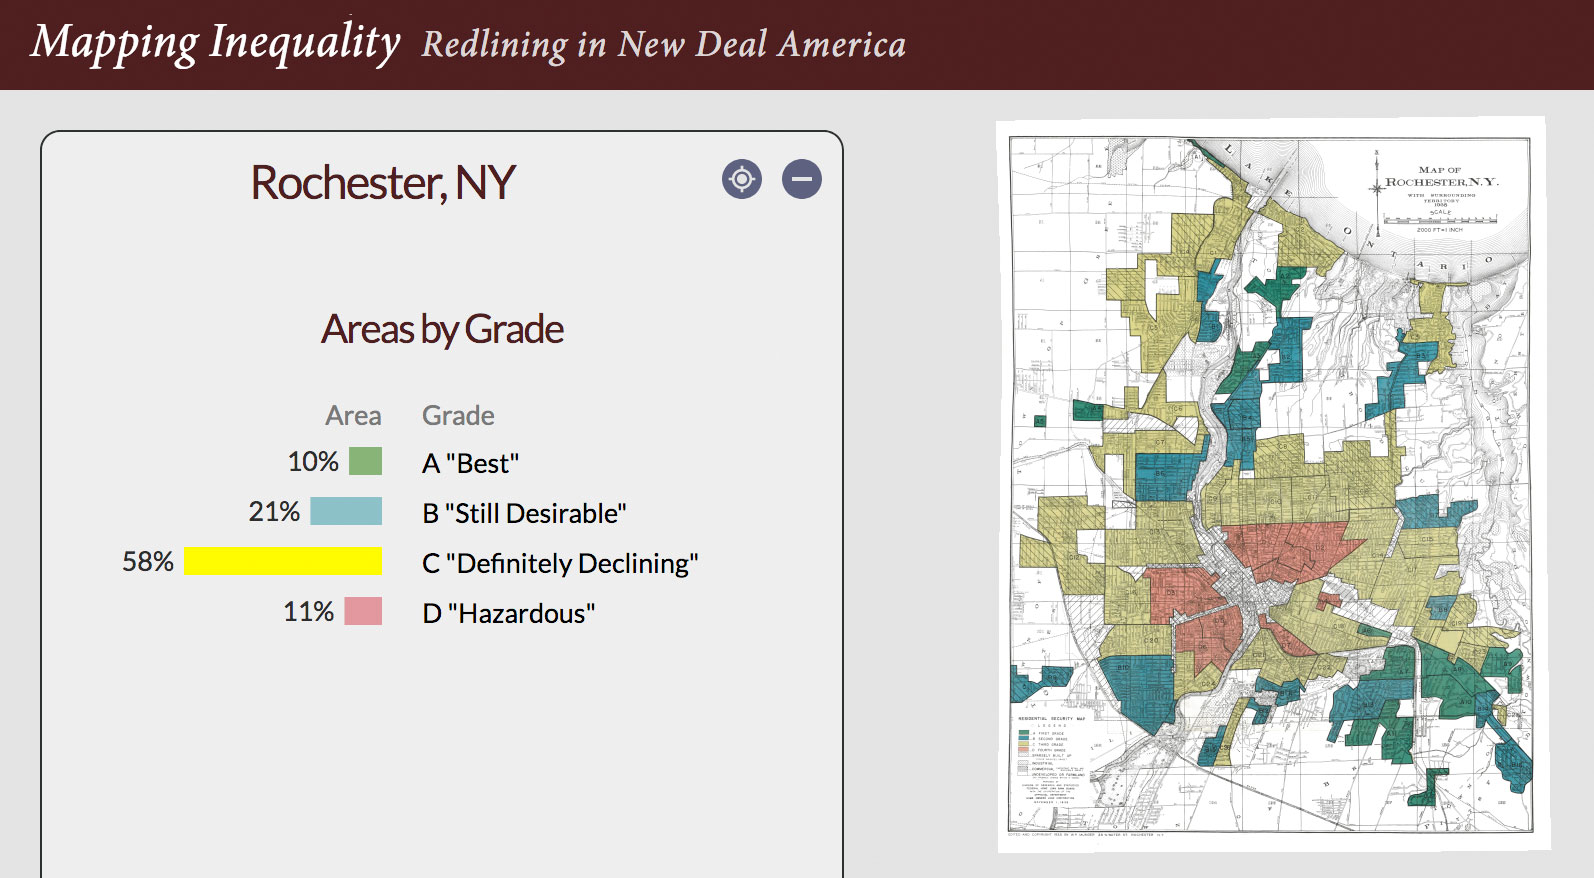 Mapping Inequality in Rochester